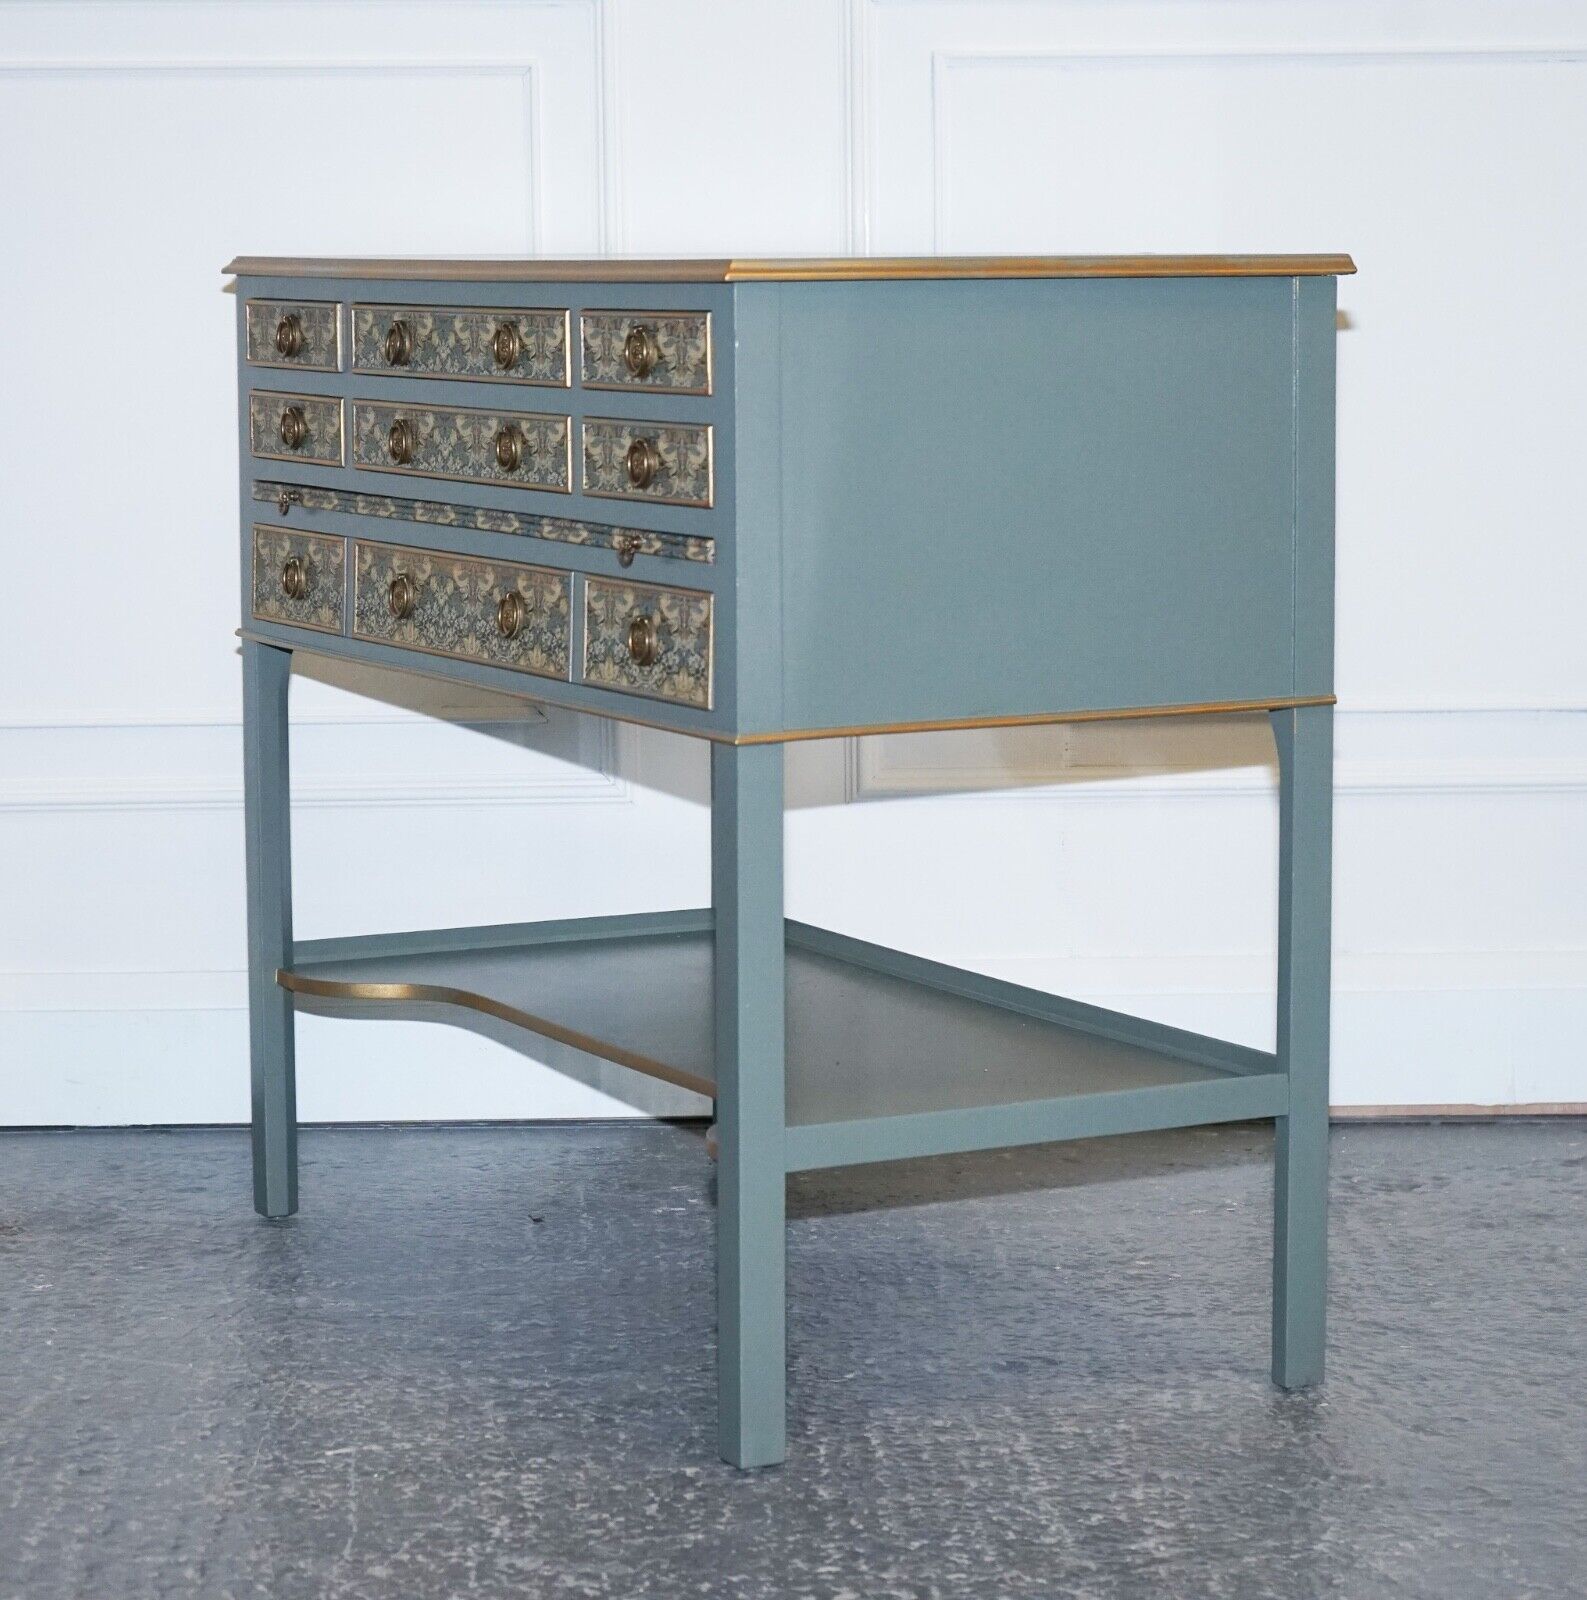 EUCALYPTUS GREEN & GOLD CONSOLE TABLE SIDEBOARD STRAWBERRY THIEF WILLIAM MORRIS